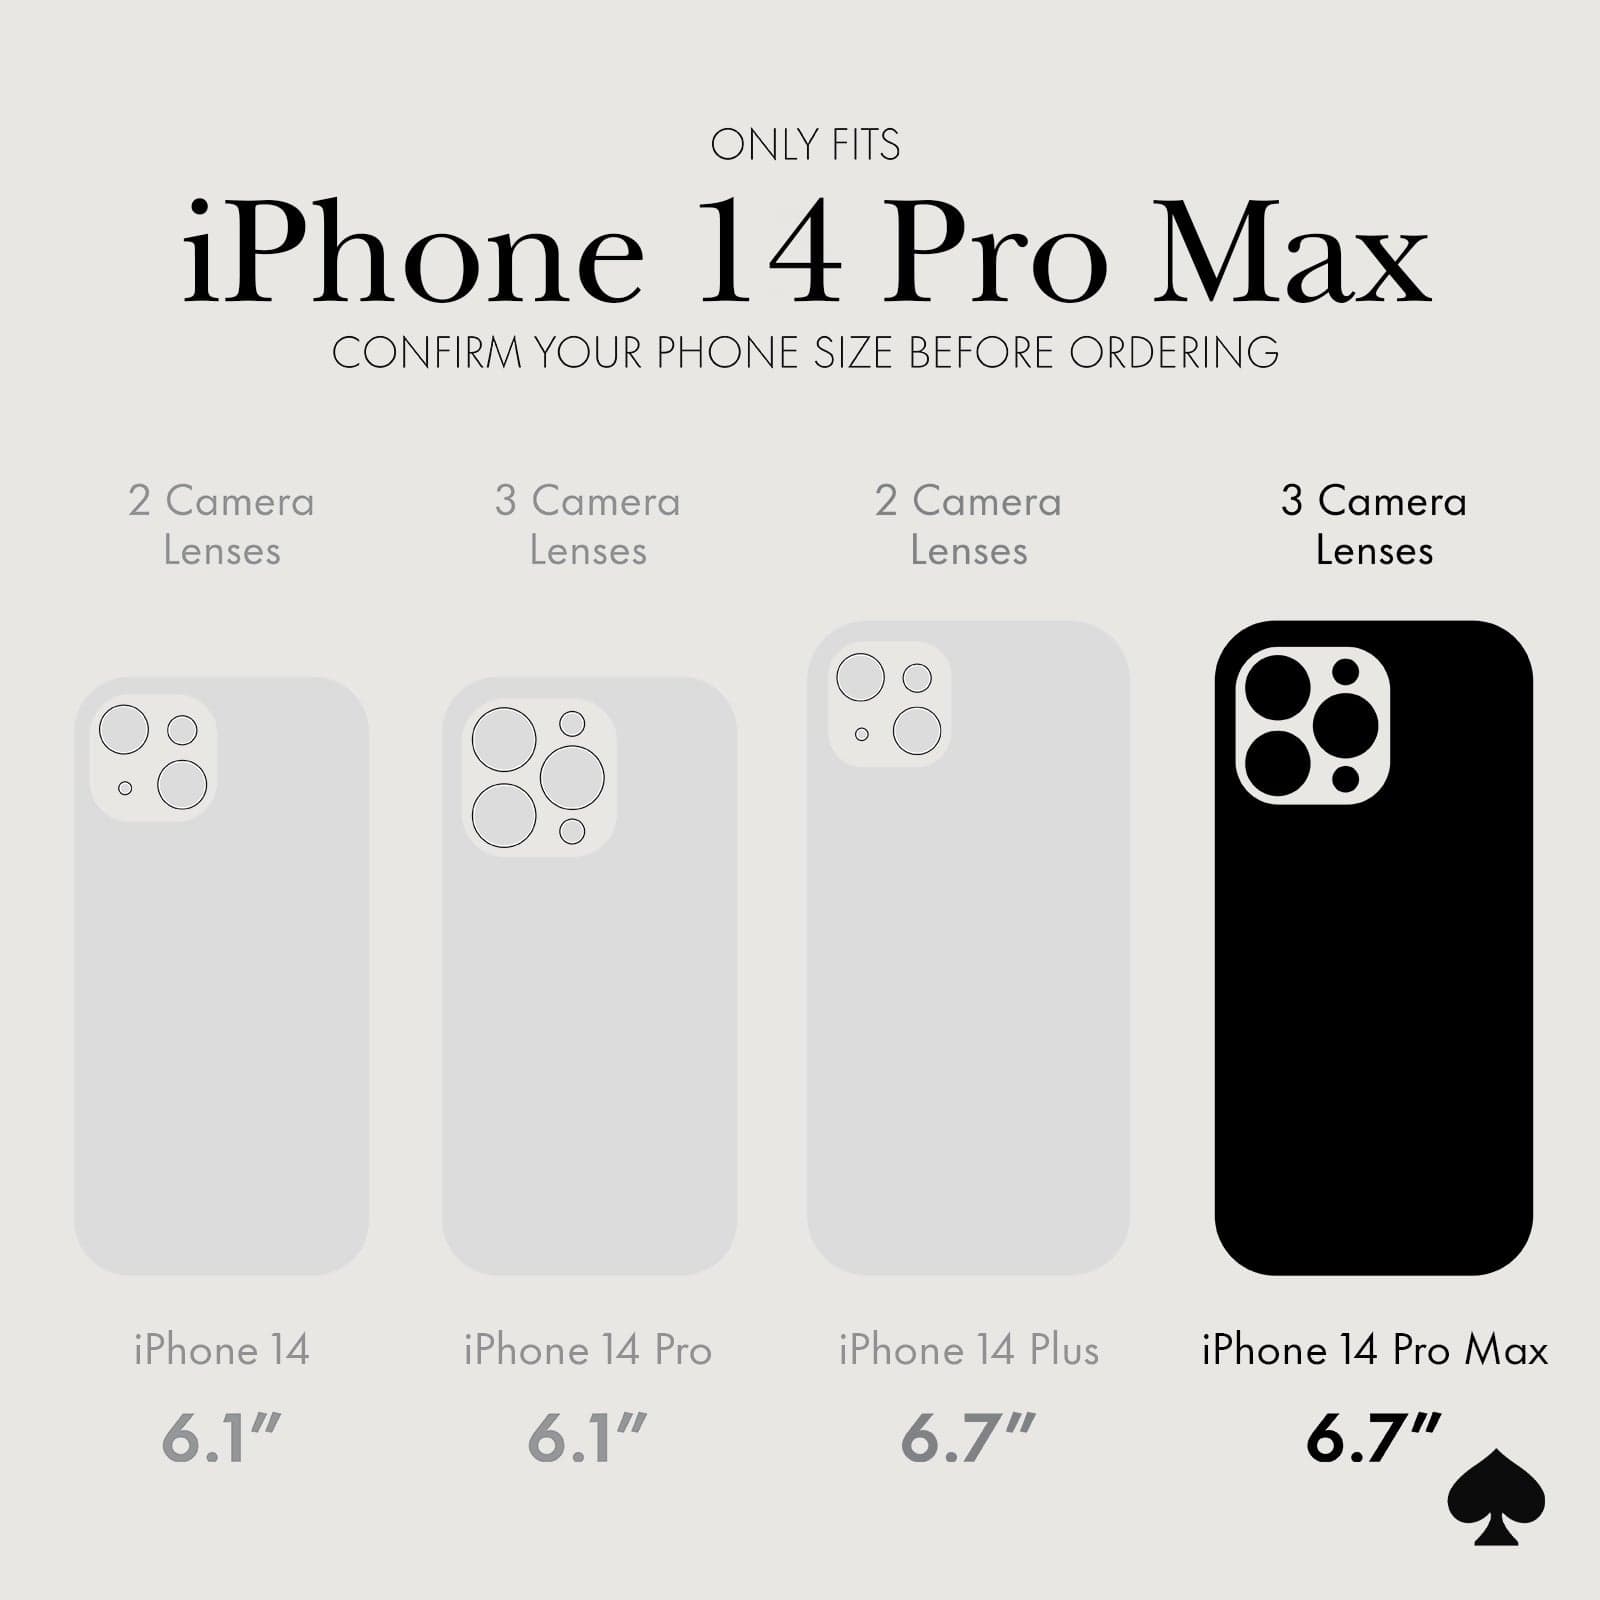 ONLY FITS IPHONE 14 PRO MAX. CONFIRM YOUR PHONE SIZE BEFORE ORDERING